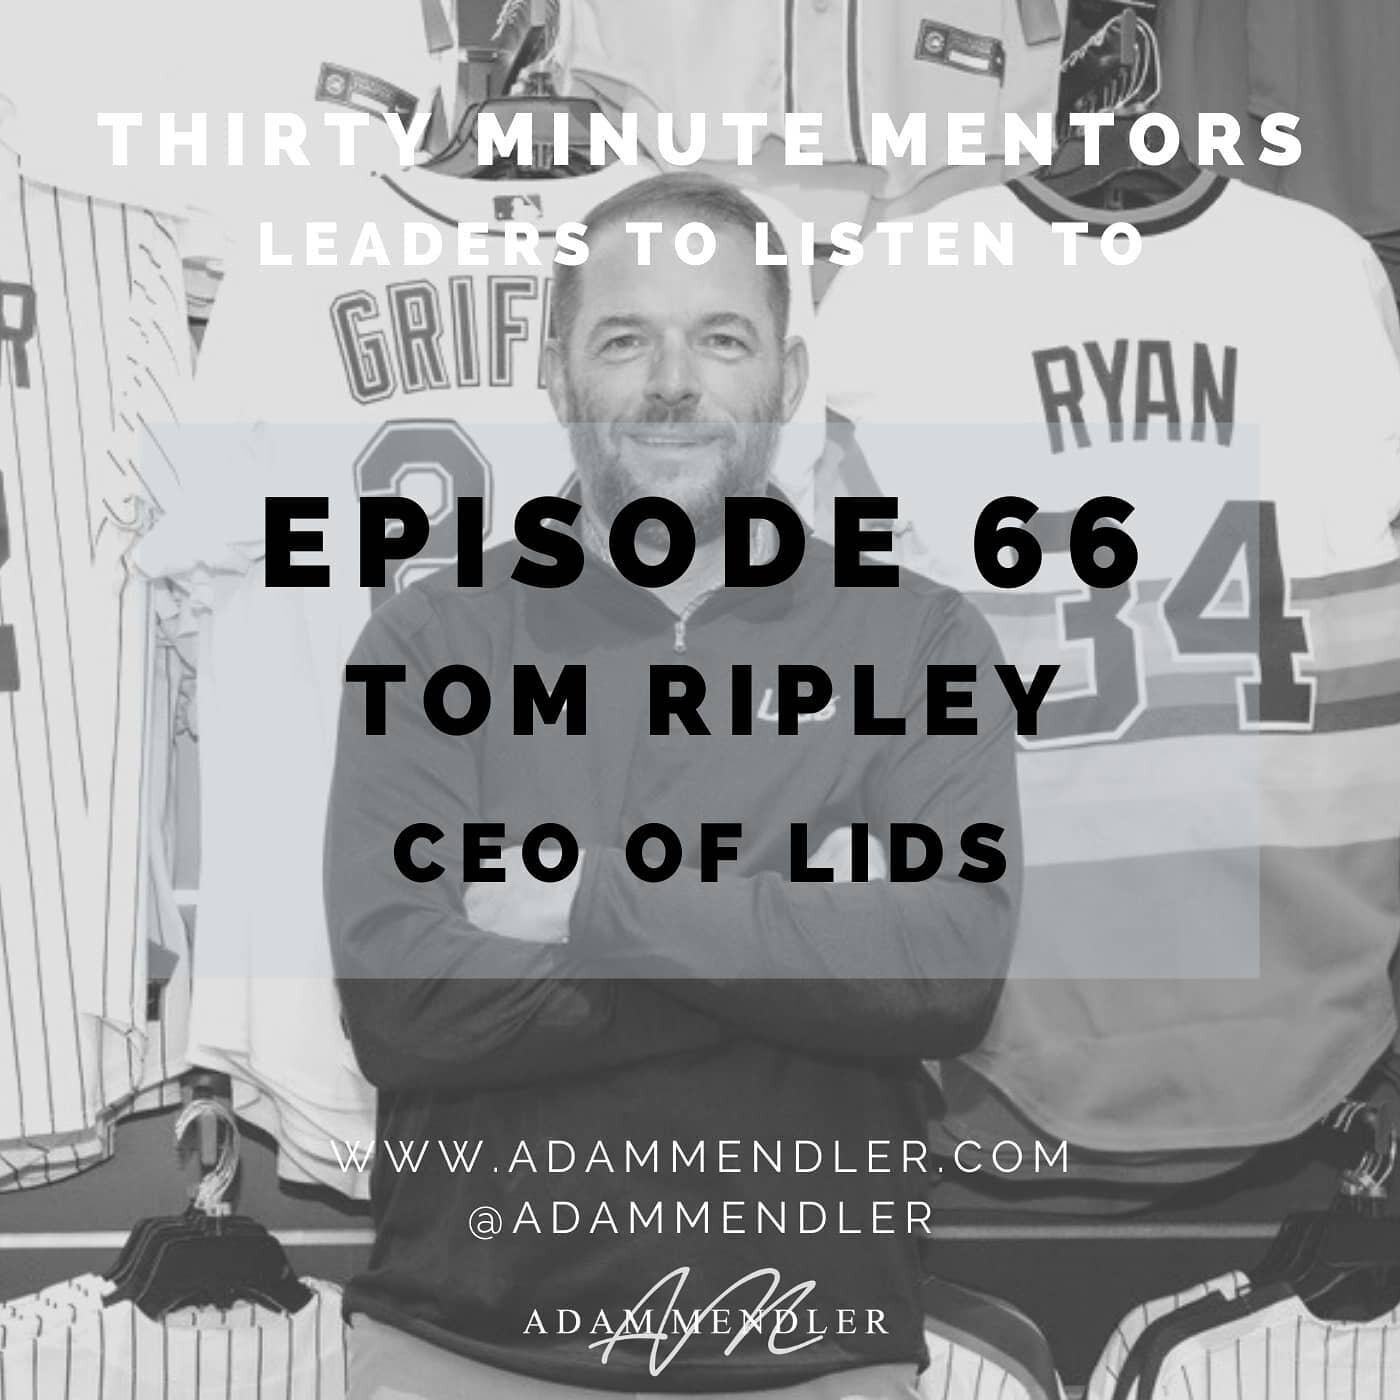 Tom Ripley is the CEO of @lids, the largest licensed sports retailer in the country, and the co-founder of the private equity firm that owns it. Tom joined me on Episode 66 of Thirty Minute Mentors to share his best lessons from his journey from Spec